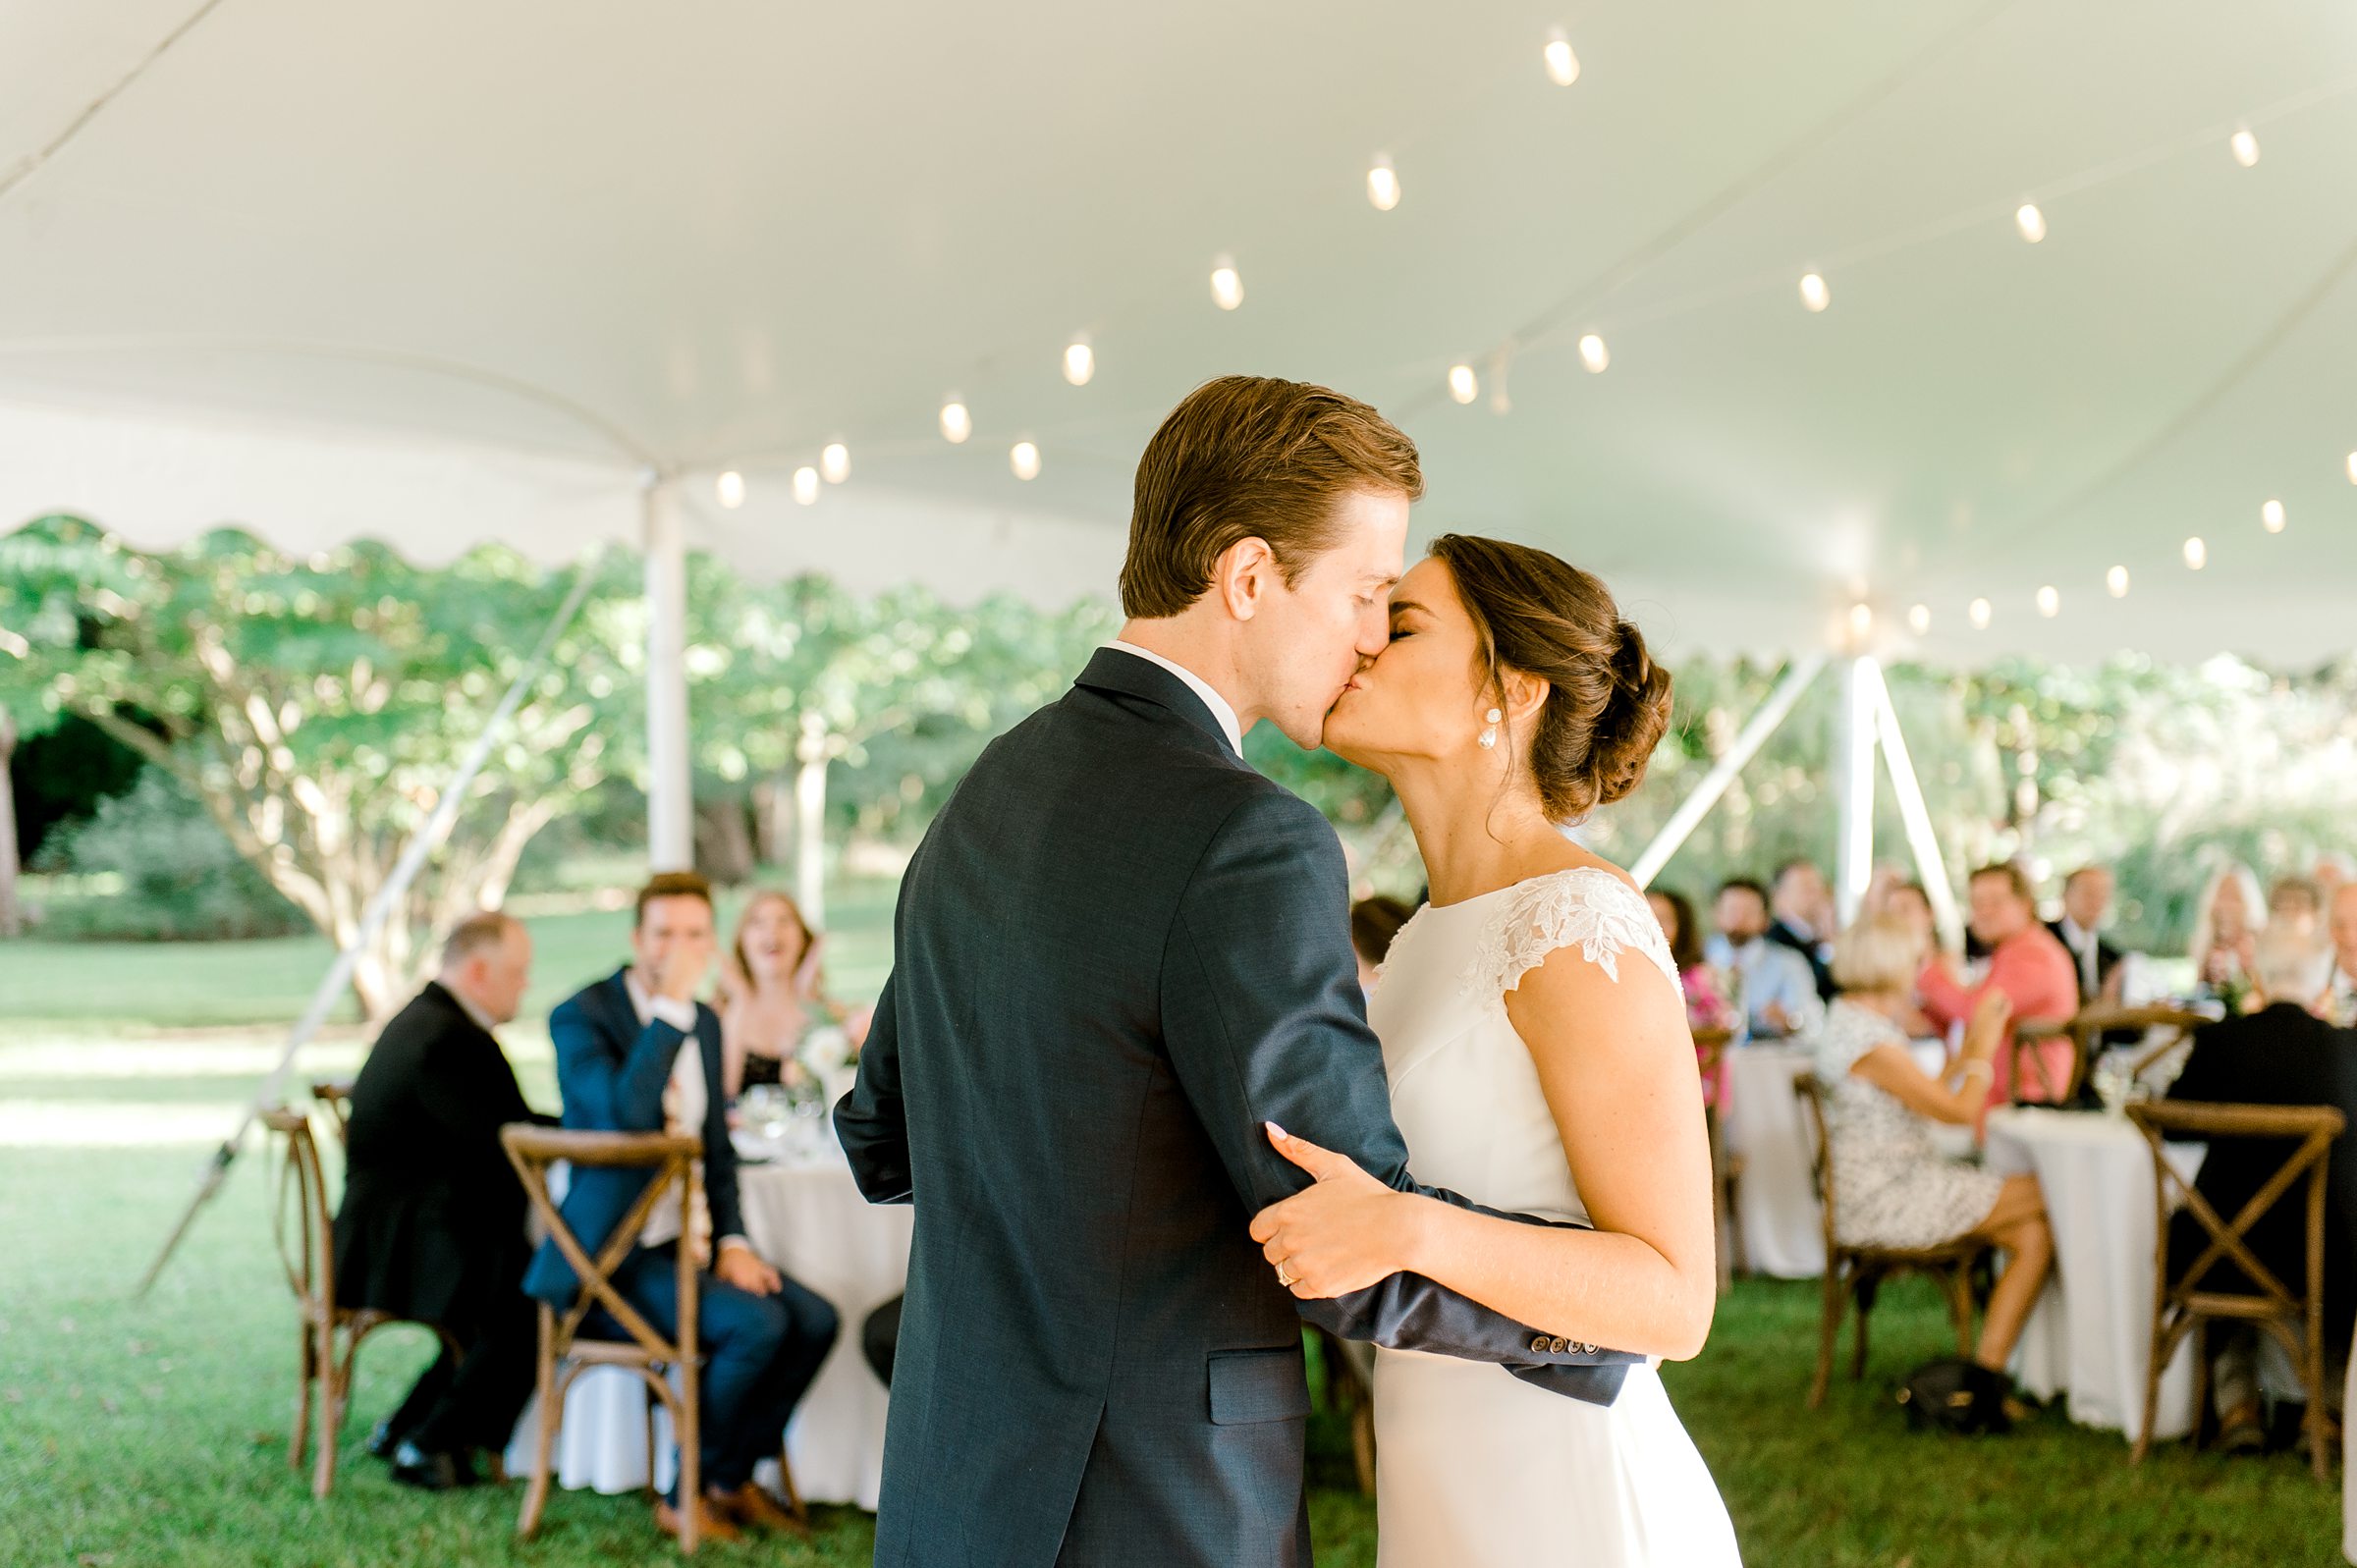 Chester River Packet Wedding Chesterown Maryland